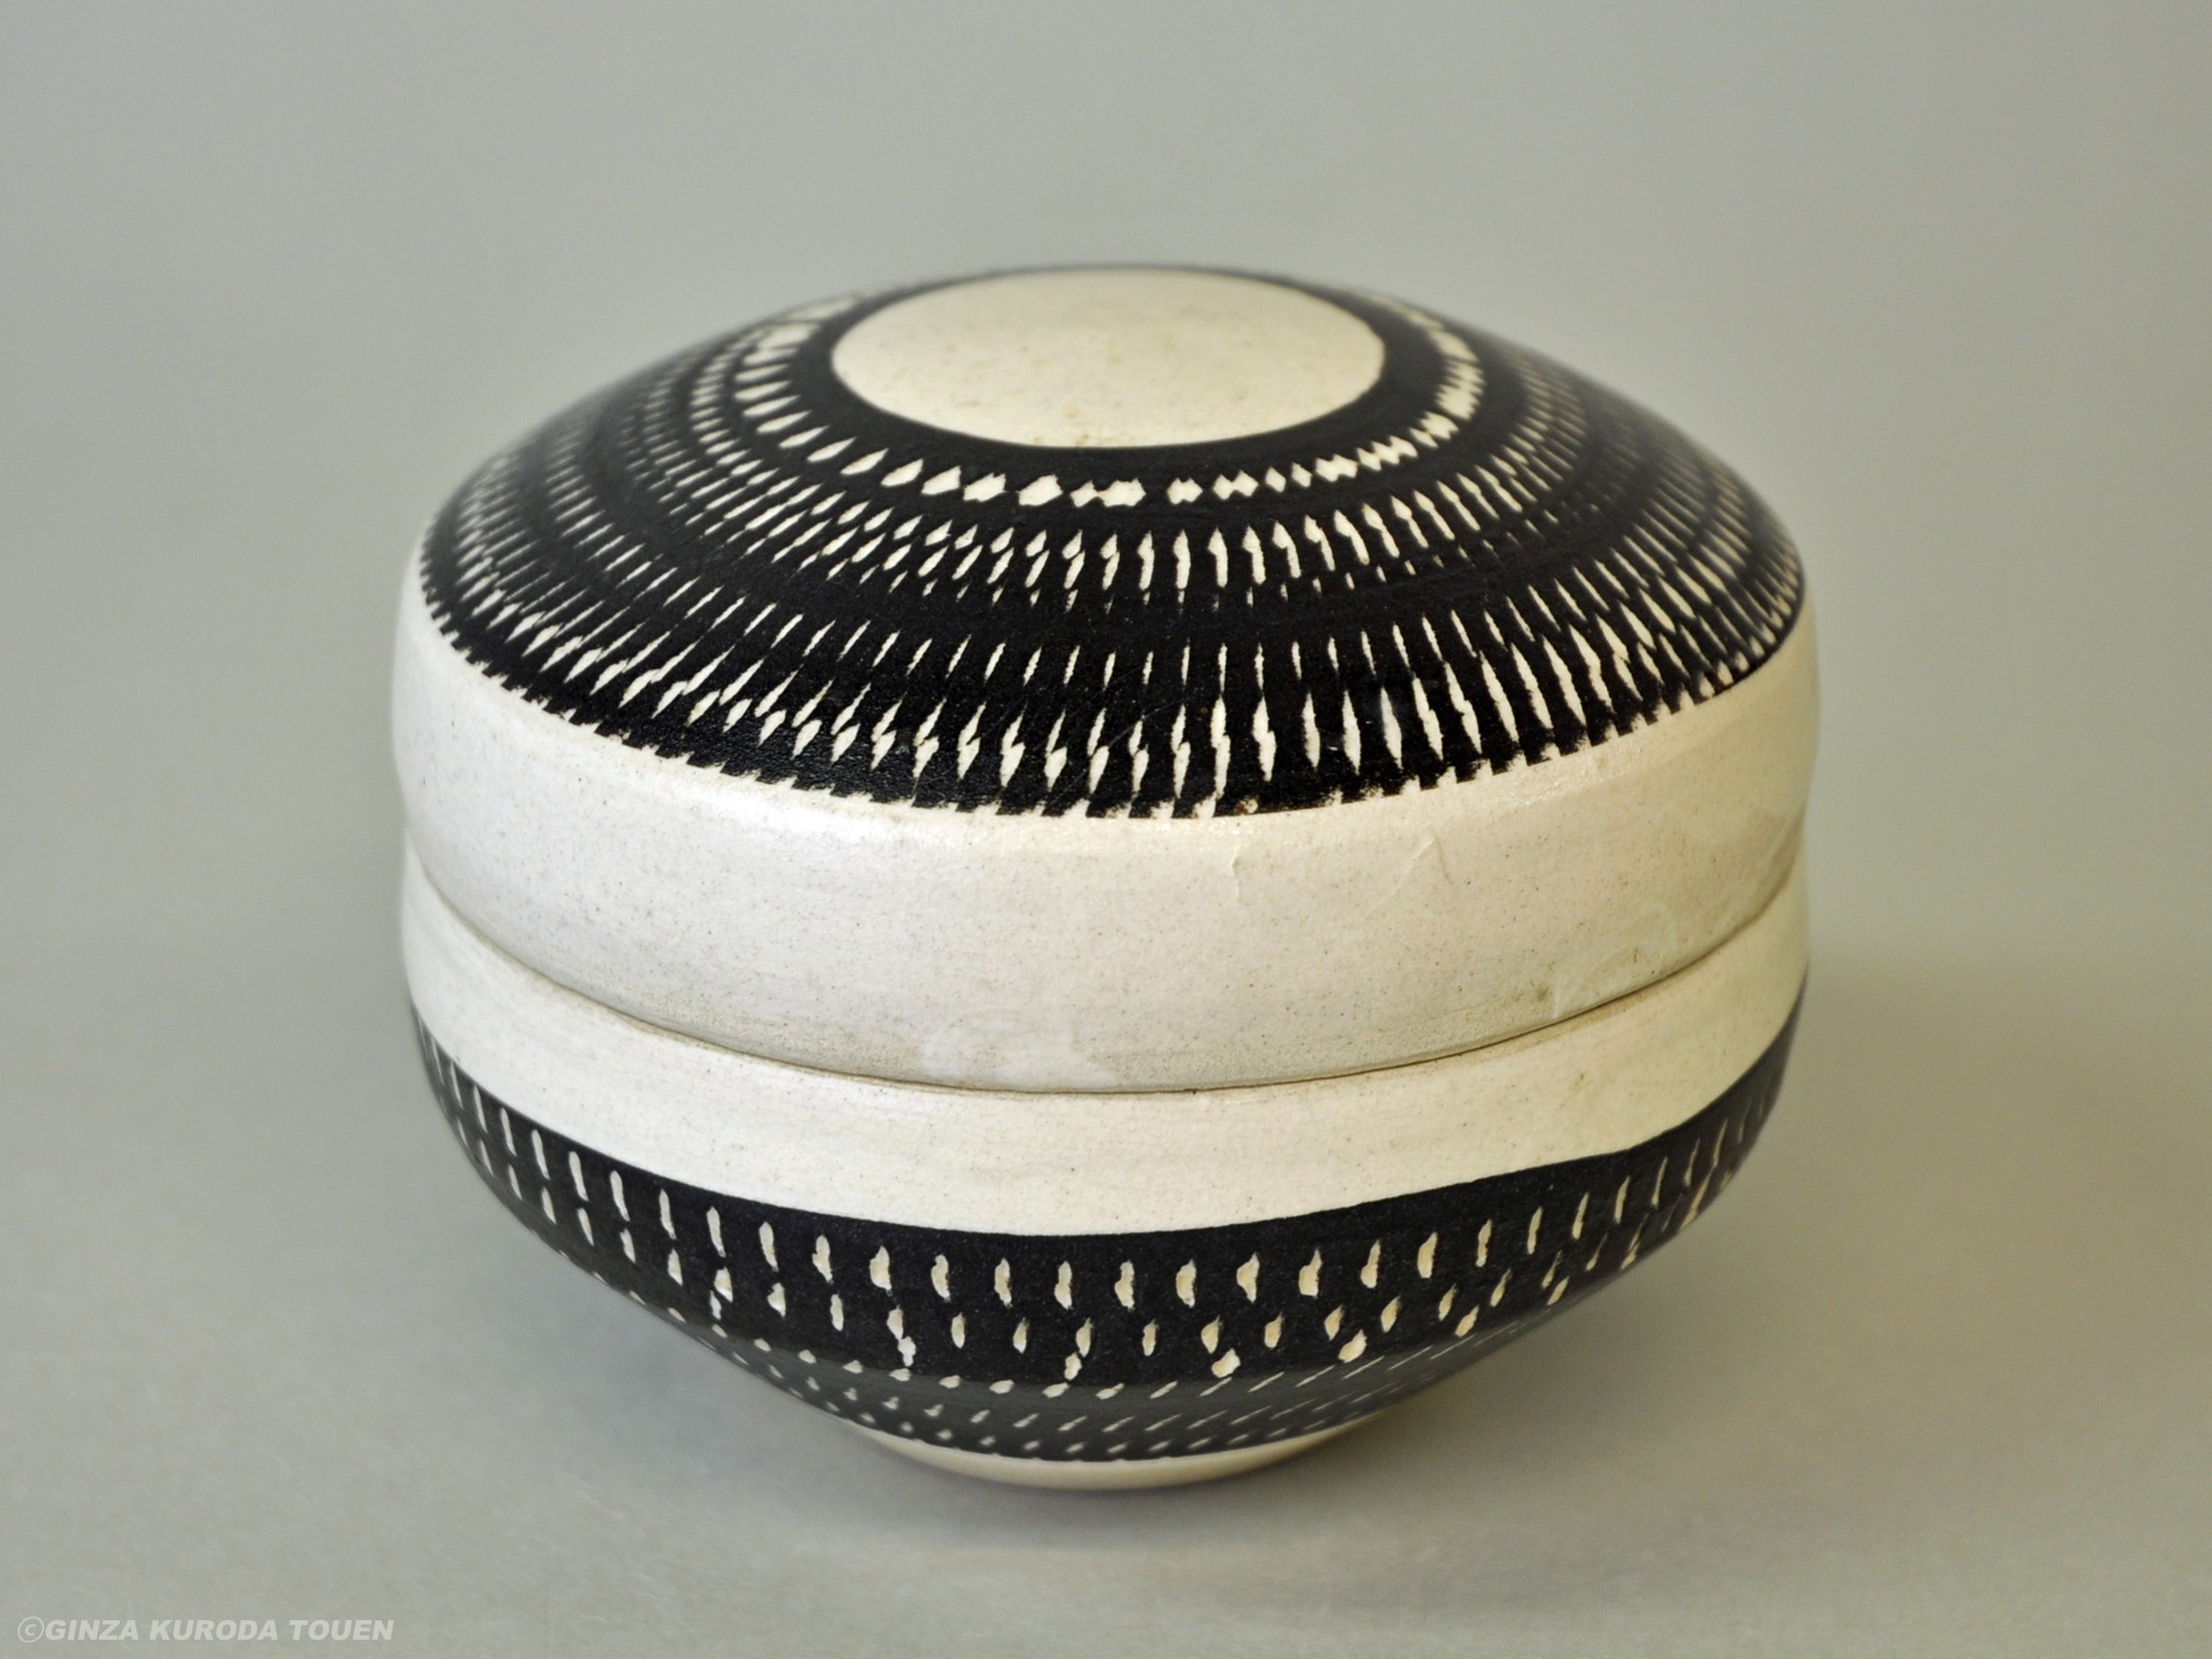 Munemaro Ishiguro: Small covered container, Chatter pattern